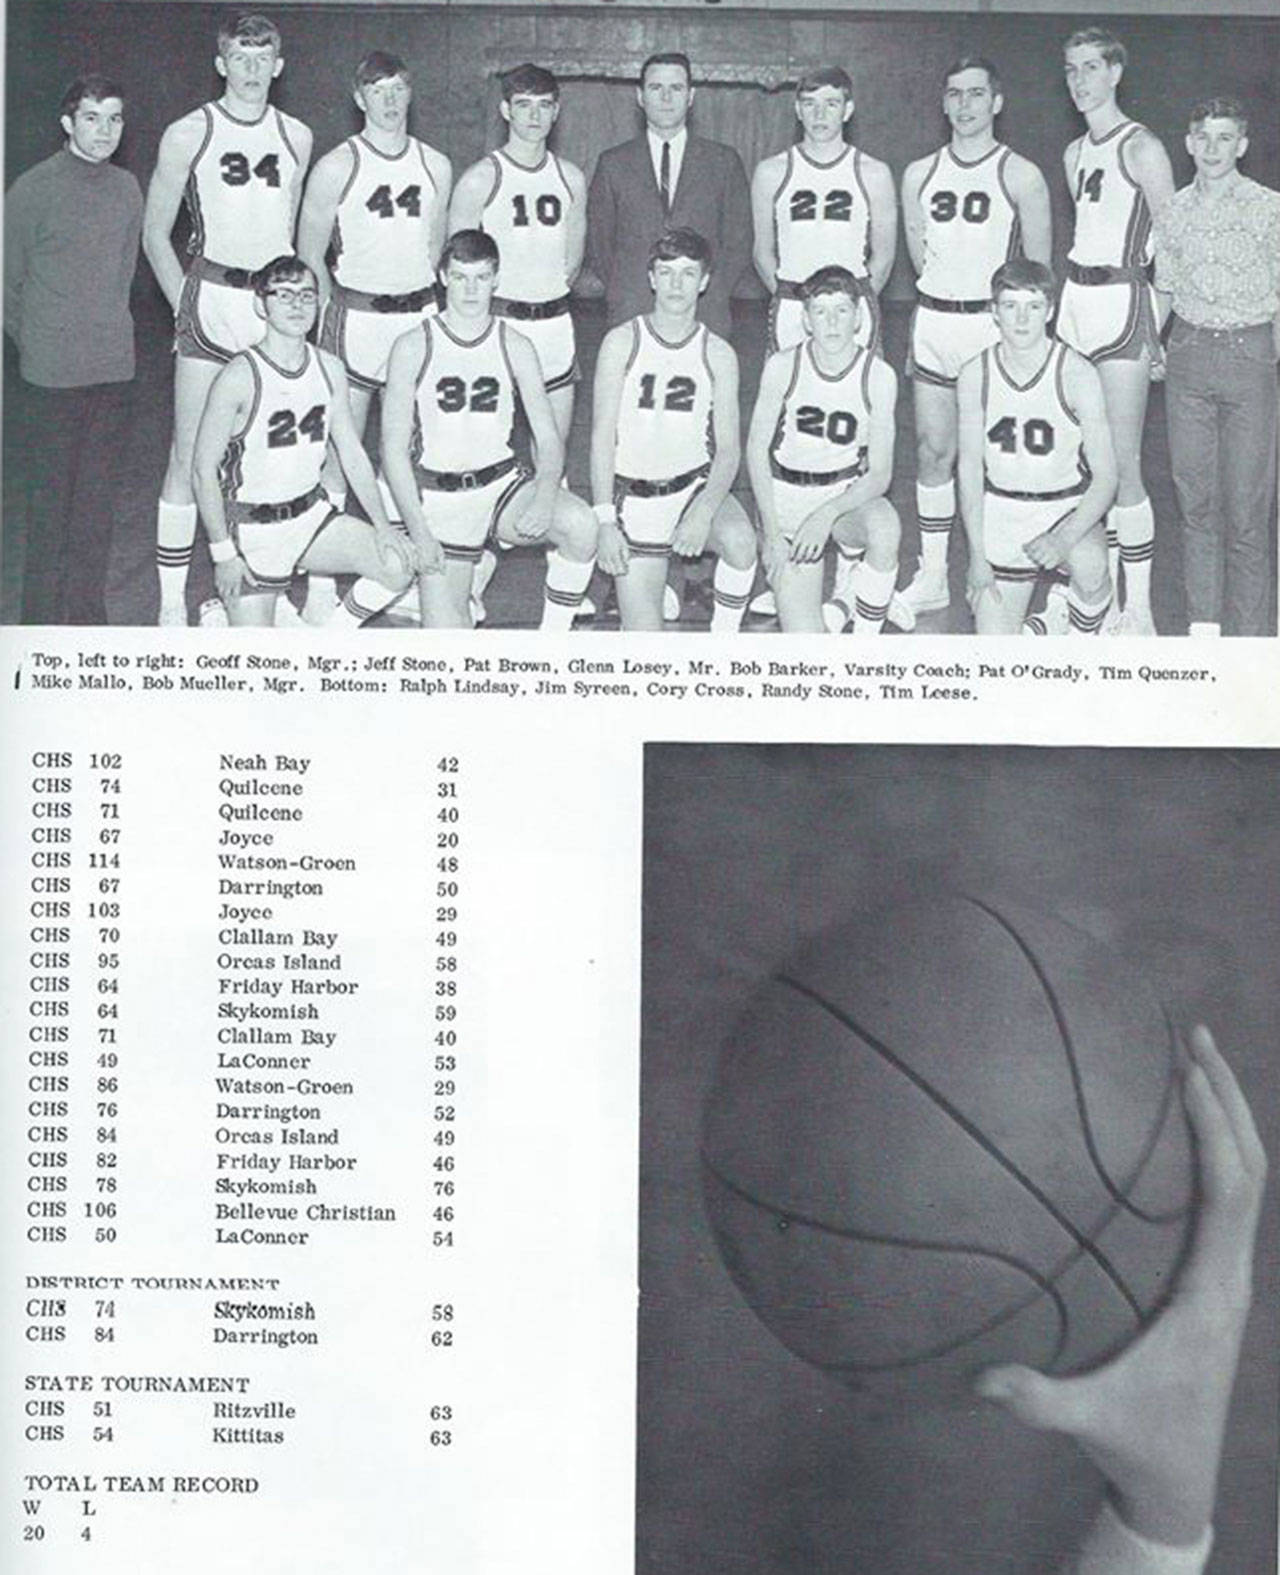 Here’s a shot of the yearbook page that features the record-setting Coupeville High School 1969-70 boys basketball team.